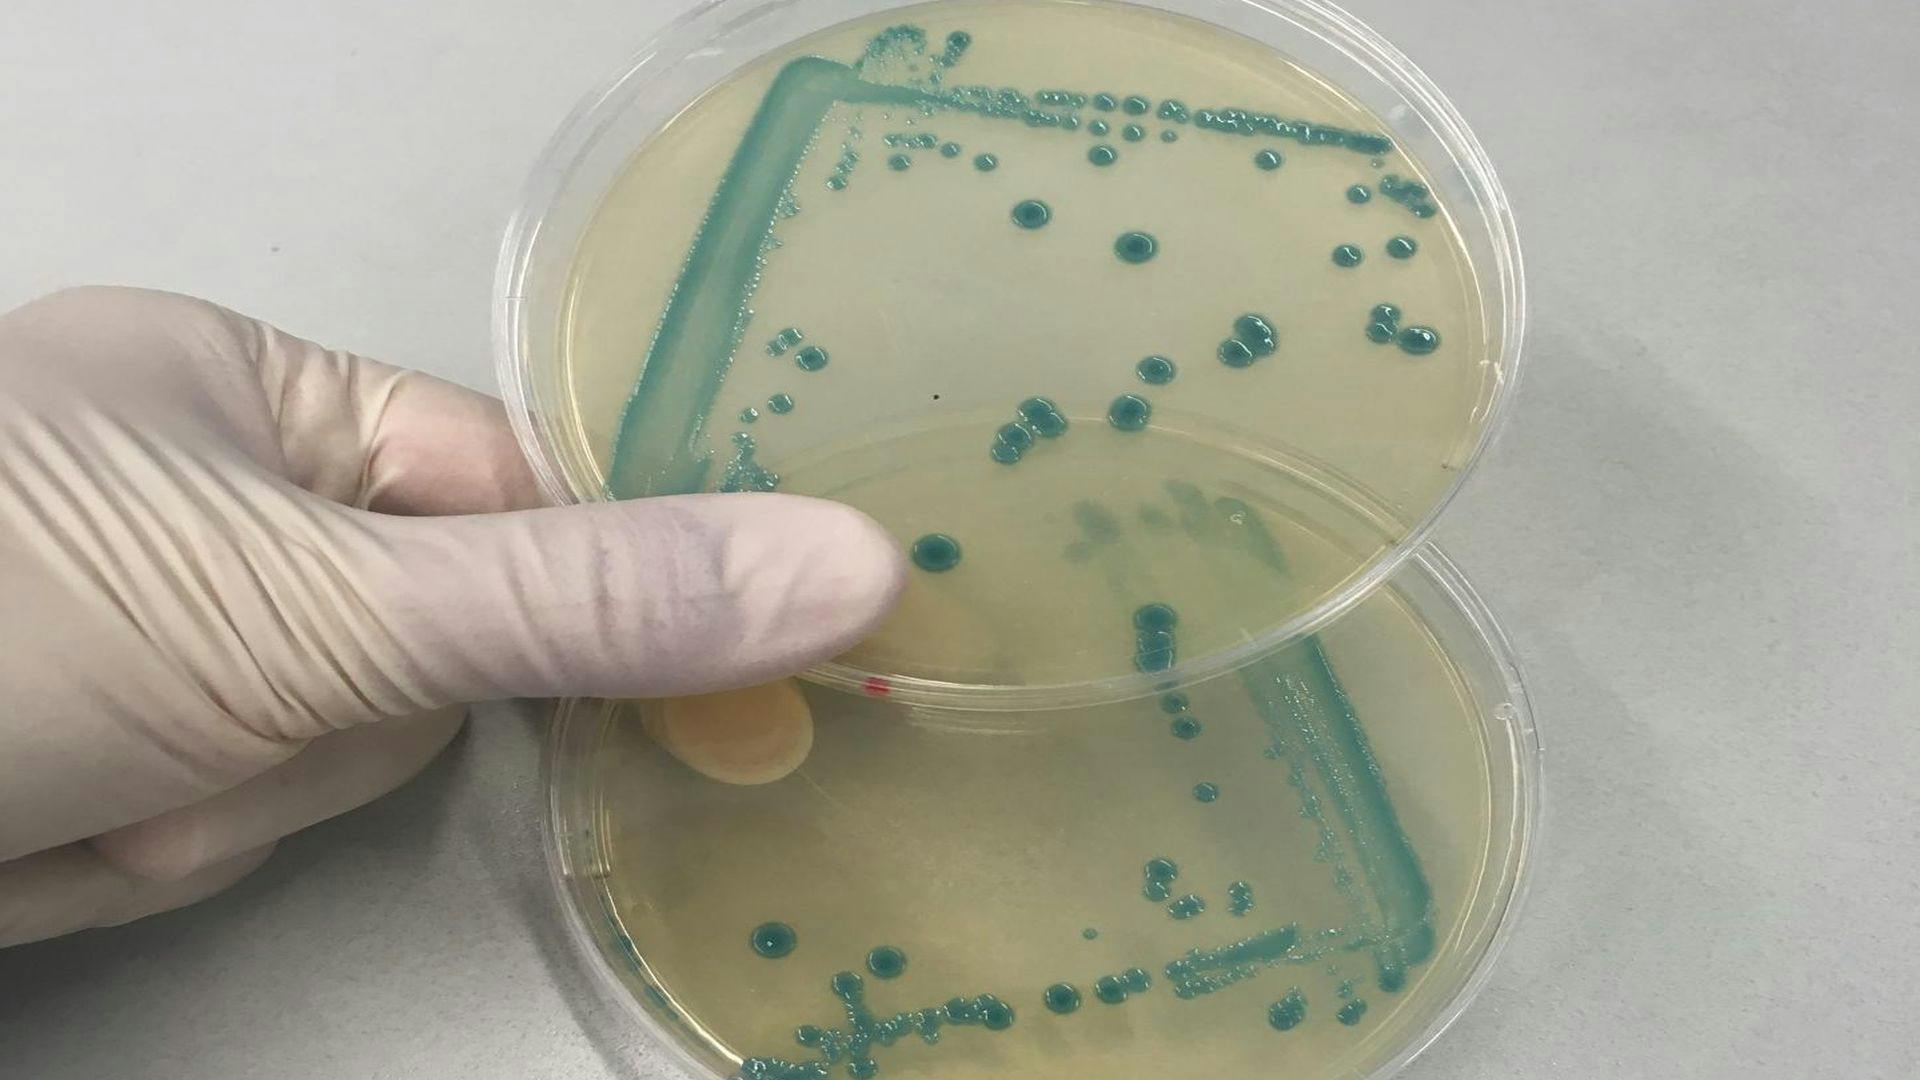 Why Some Listeria Strains Survive Good Food Hygiene Standards